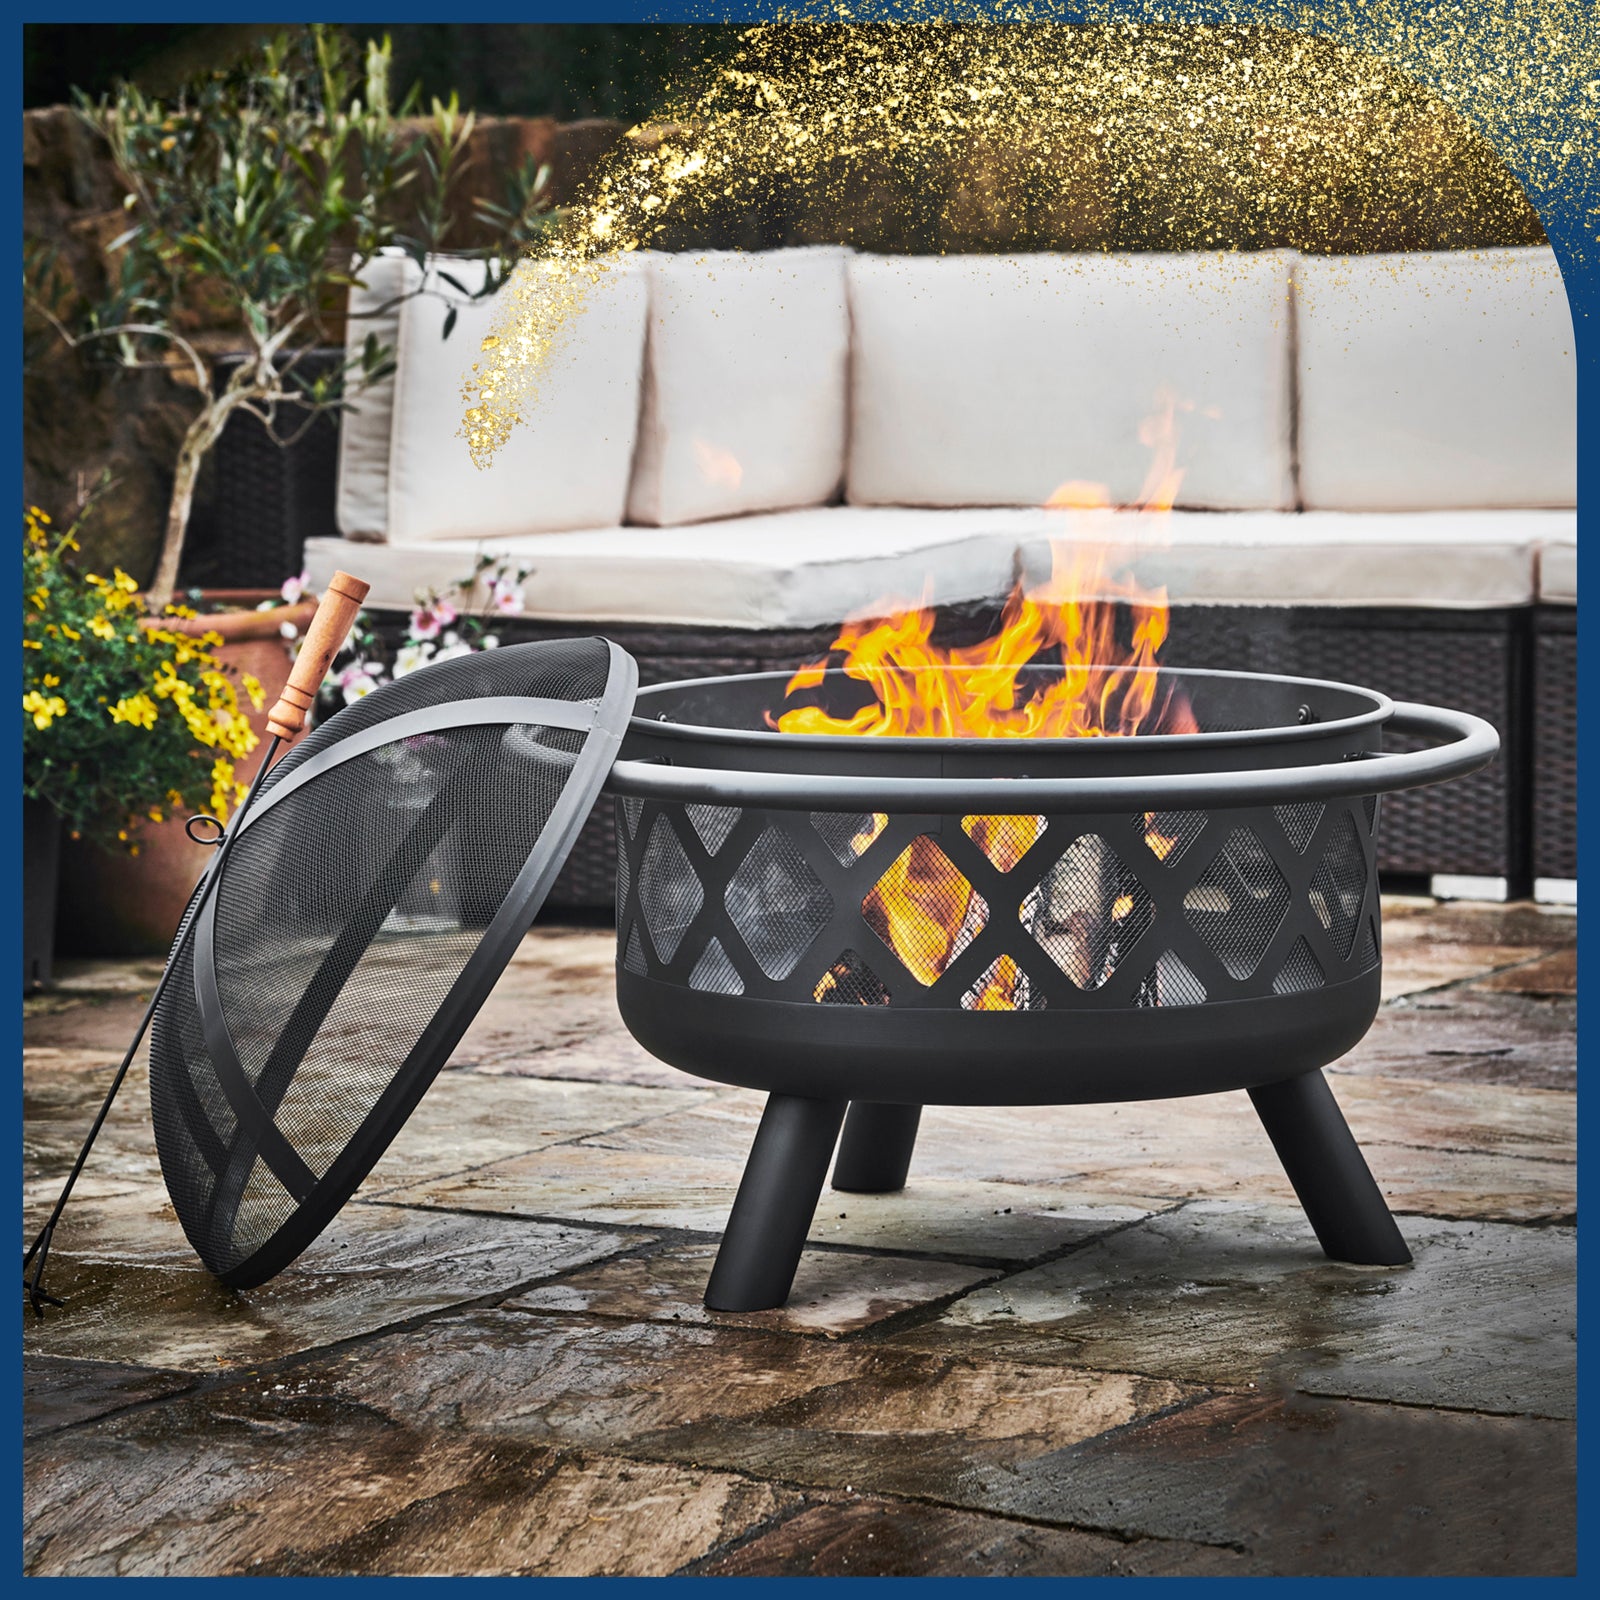 a black decorative fire pit holds a fire next to an outdoor couch on a chilly fall day